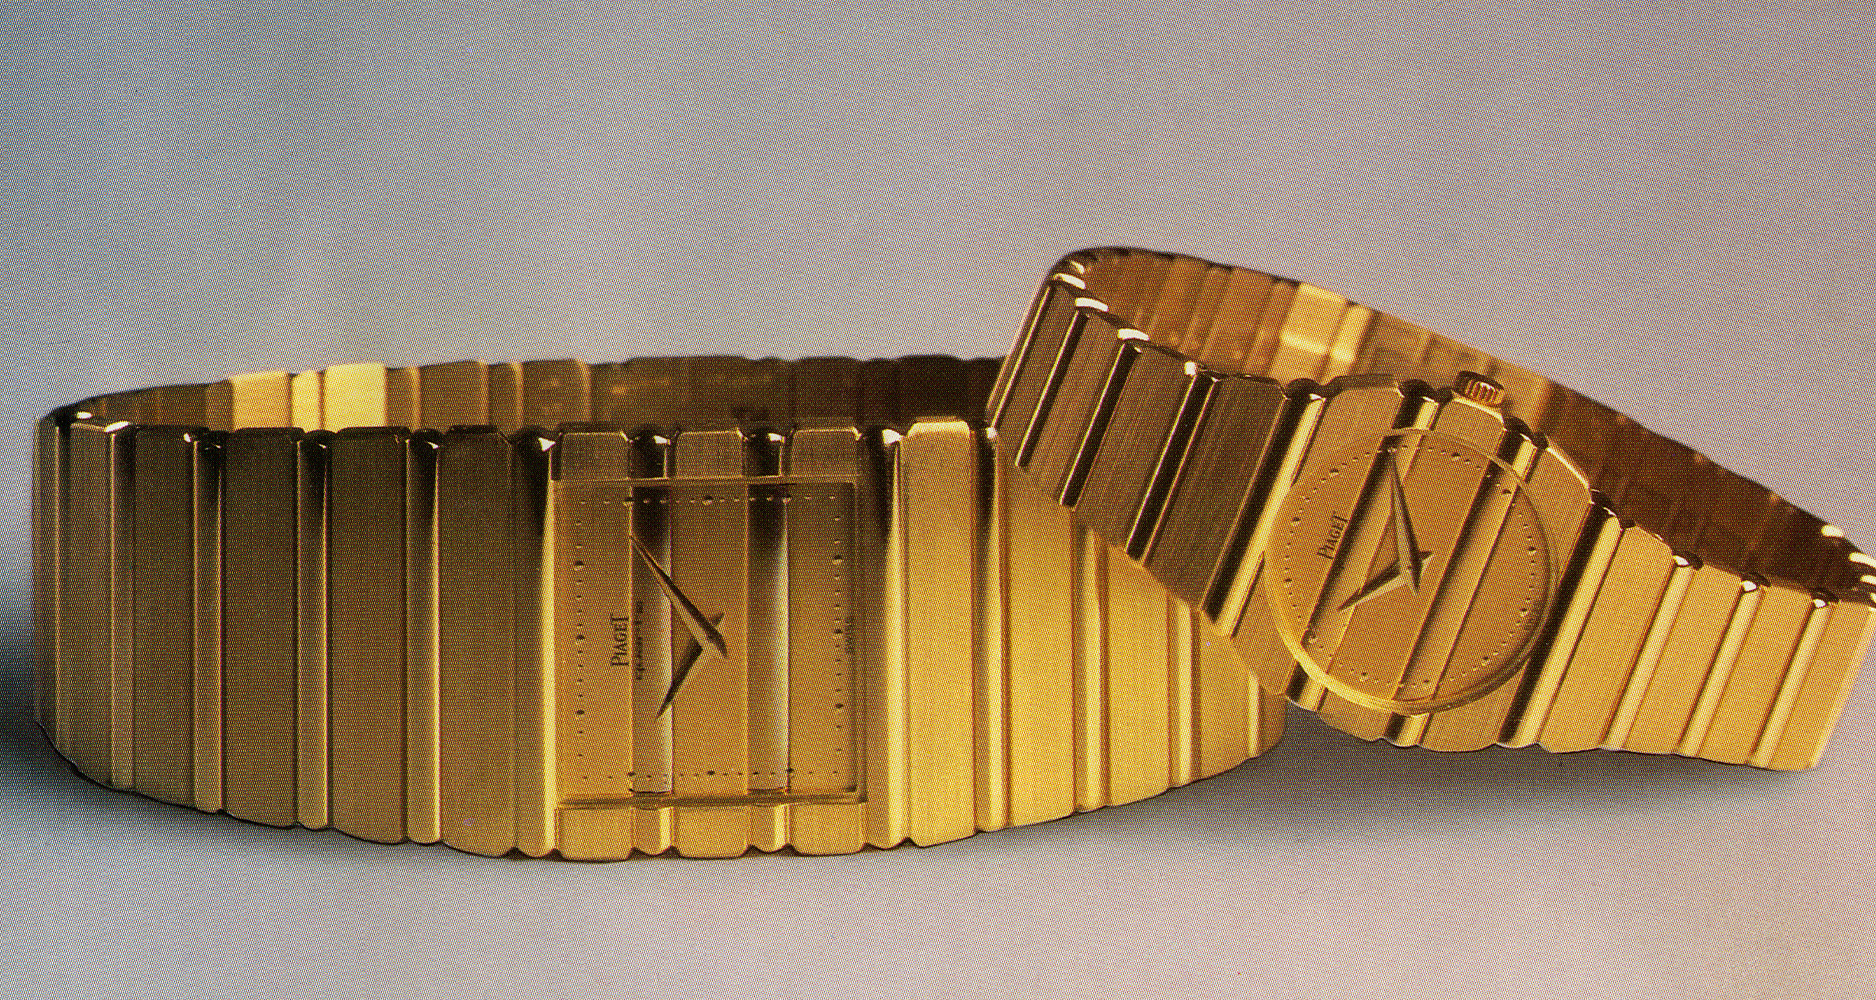 The Piaget Polo from 1979, in square and round case designs.